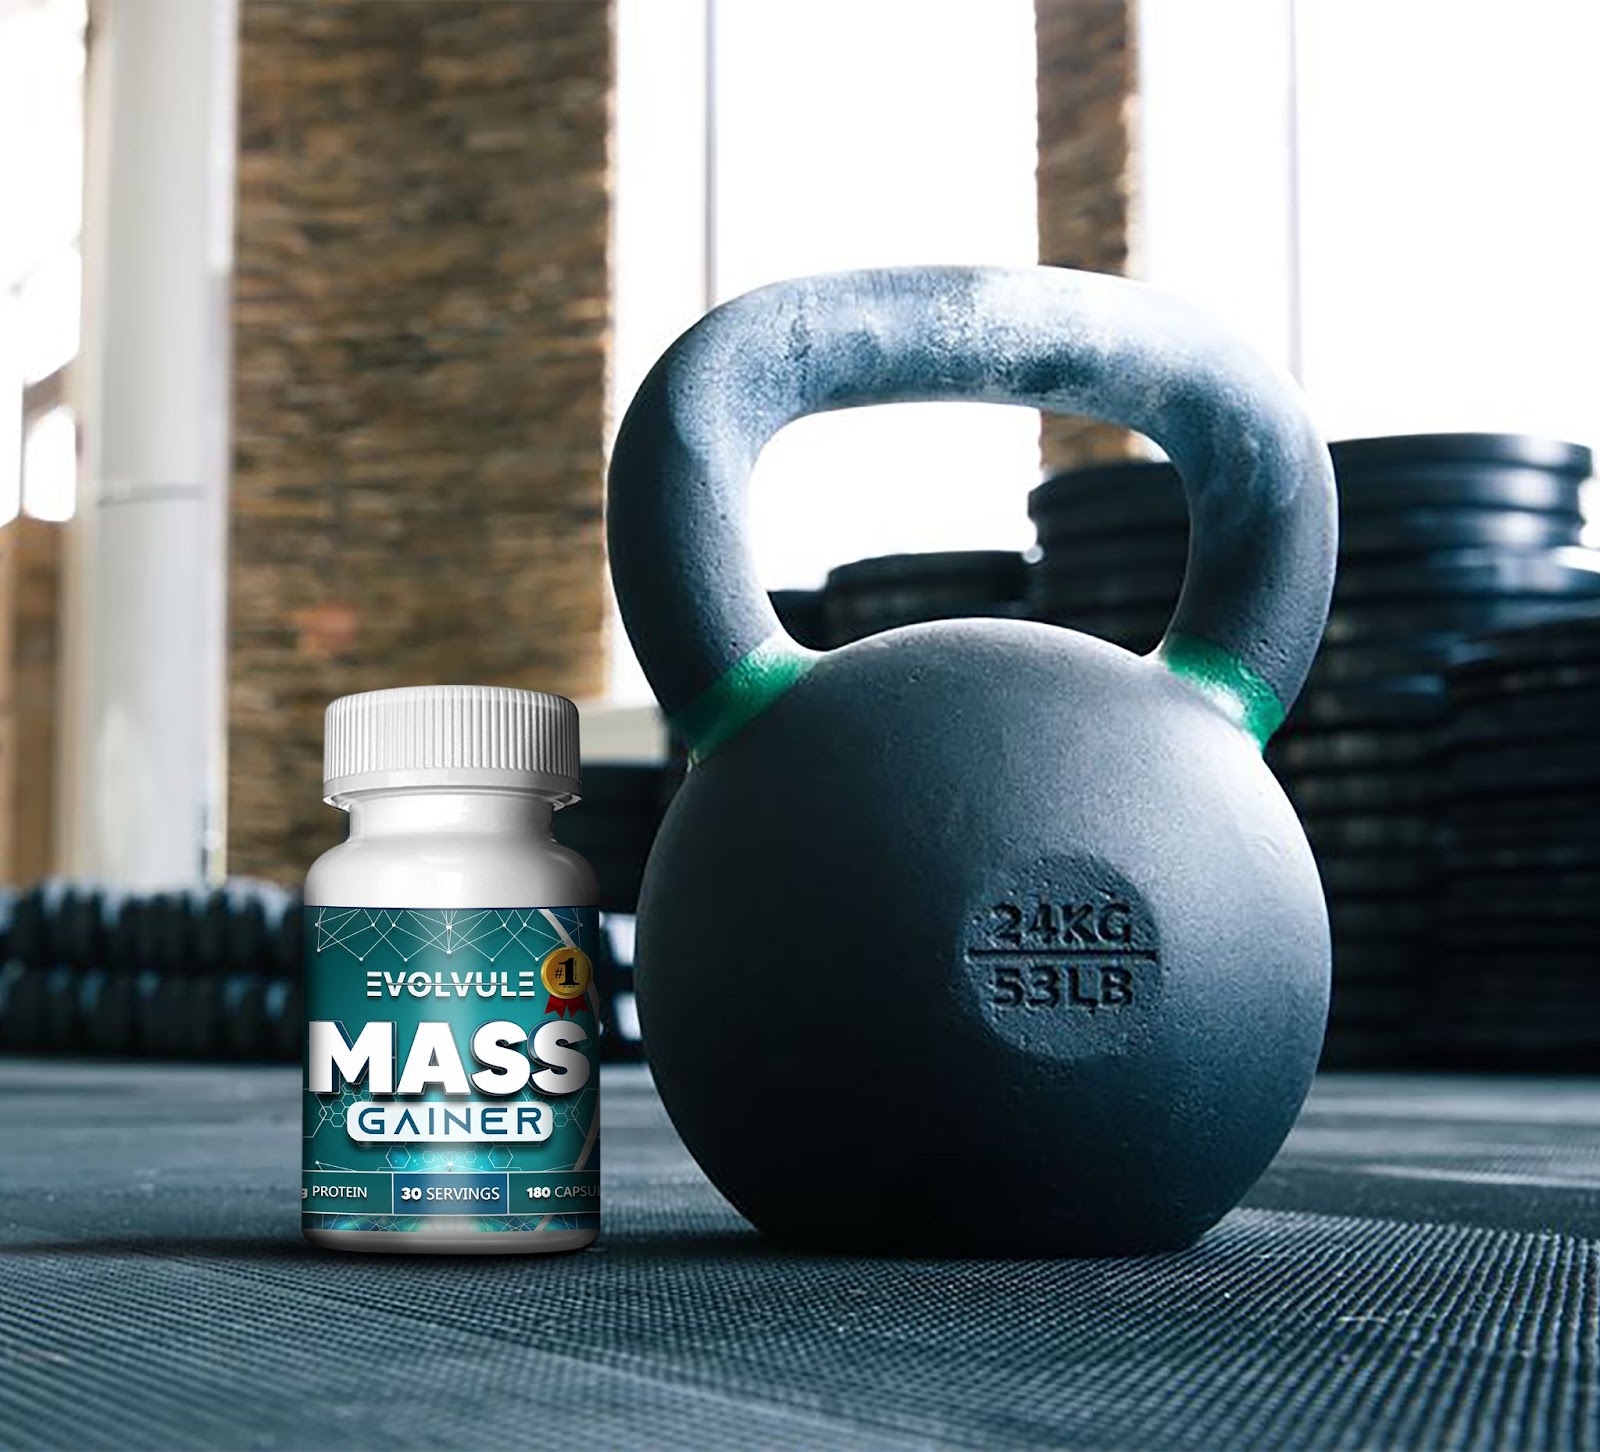 Mass Gainer Meal Replacement: Guidelines You NEED To Know